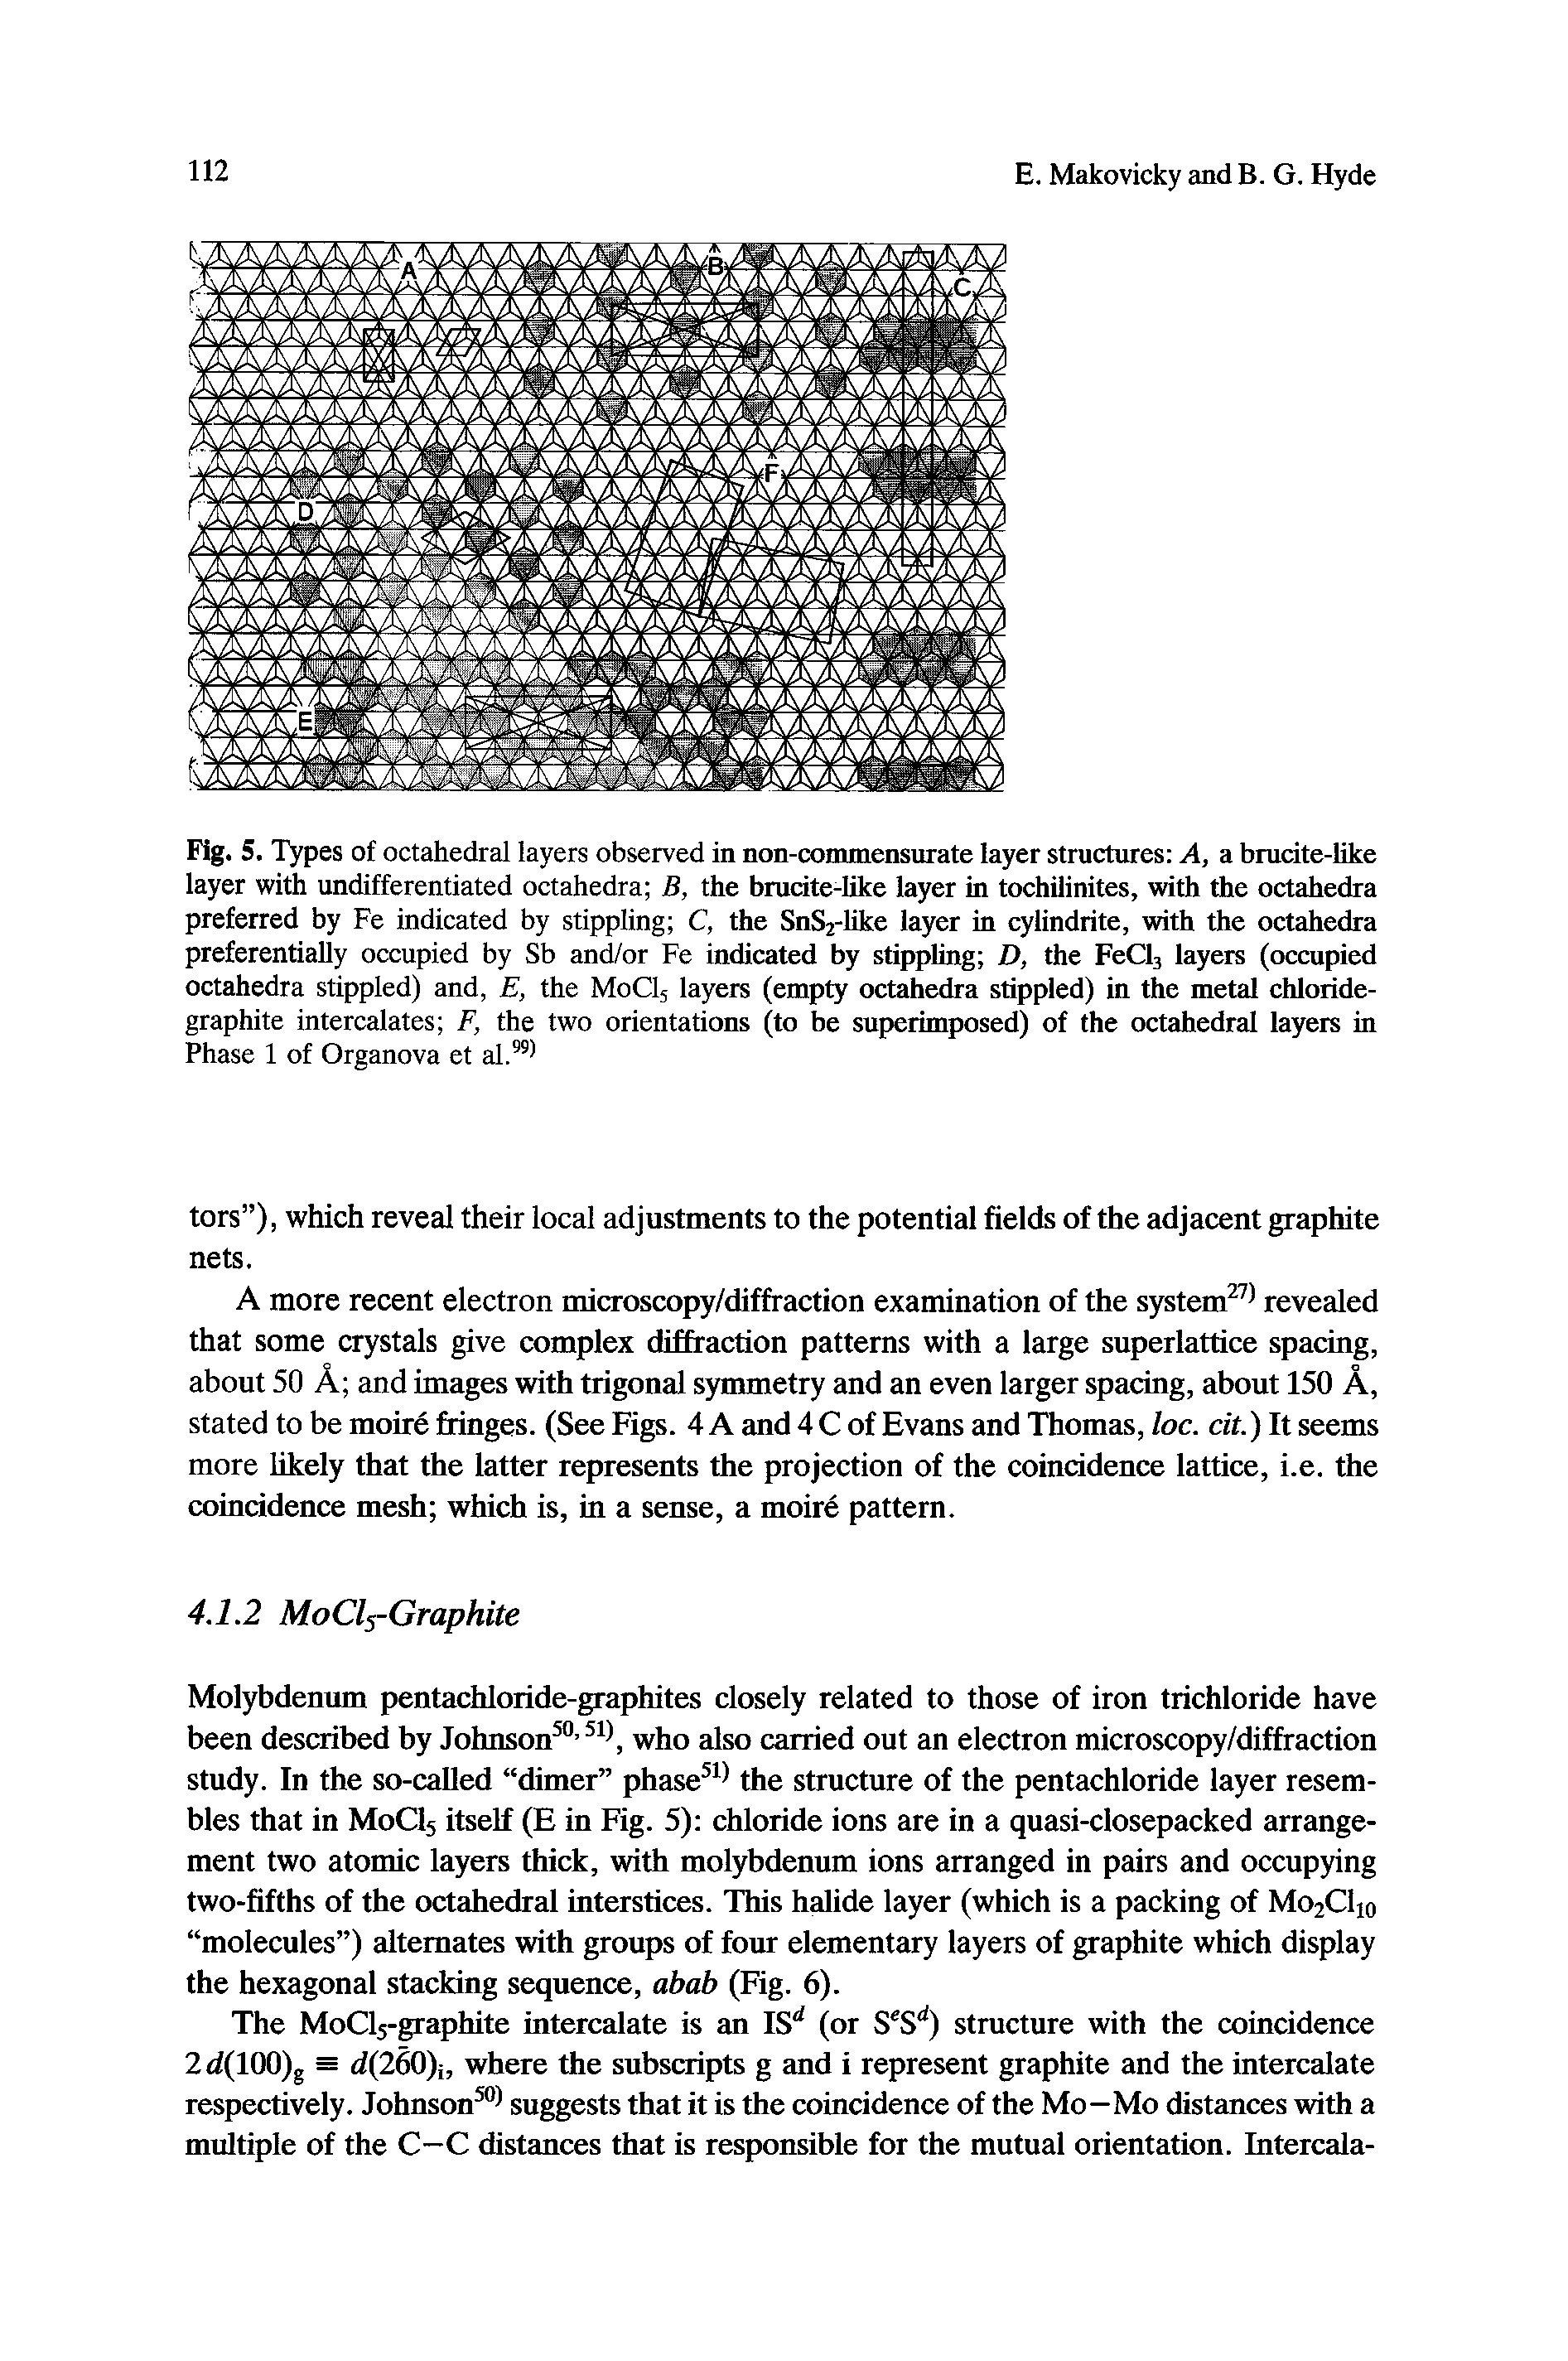 Fig. S. Types of octahedral layers observed in non-commensurate layer structures A, a brucite-like layer with undifferentiated octahedra B, the brudte-Uke layer in tochilinites, with the octahedra preferred by Fe indicated by stippling C, the SnS2-like layer in cylindrite, with the octahedra preferentially occupied by Sb and/or Fe indicated by stippling D, the FeCls layers (occupied octahedra stippled) and, E, the M0CI5 layers (empty octahedra stippled) in the metal chloride-graphite intercalates F, the two orientations (to be superimposed) of the octahedral layers in Phase 1 of Organova et al. ...